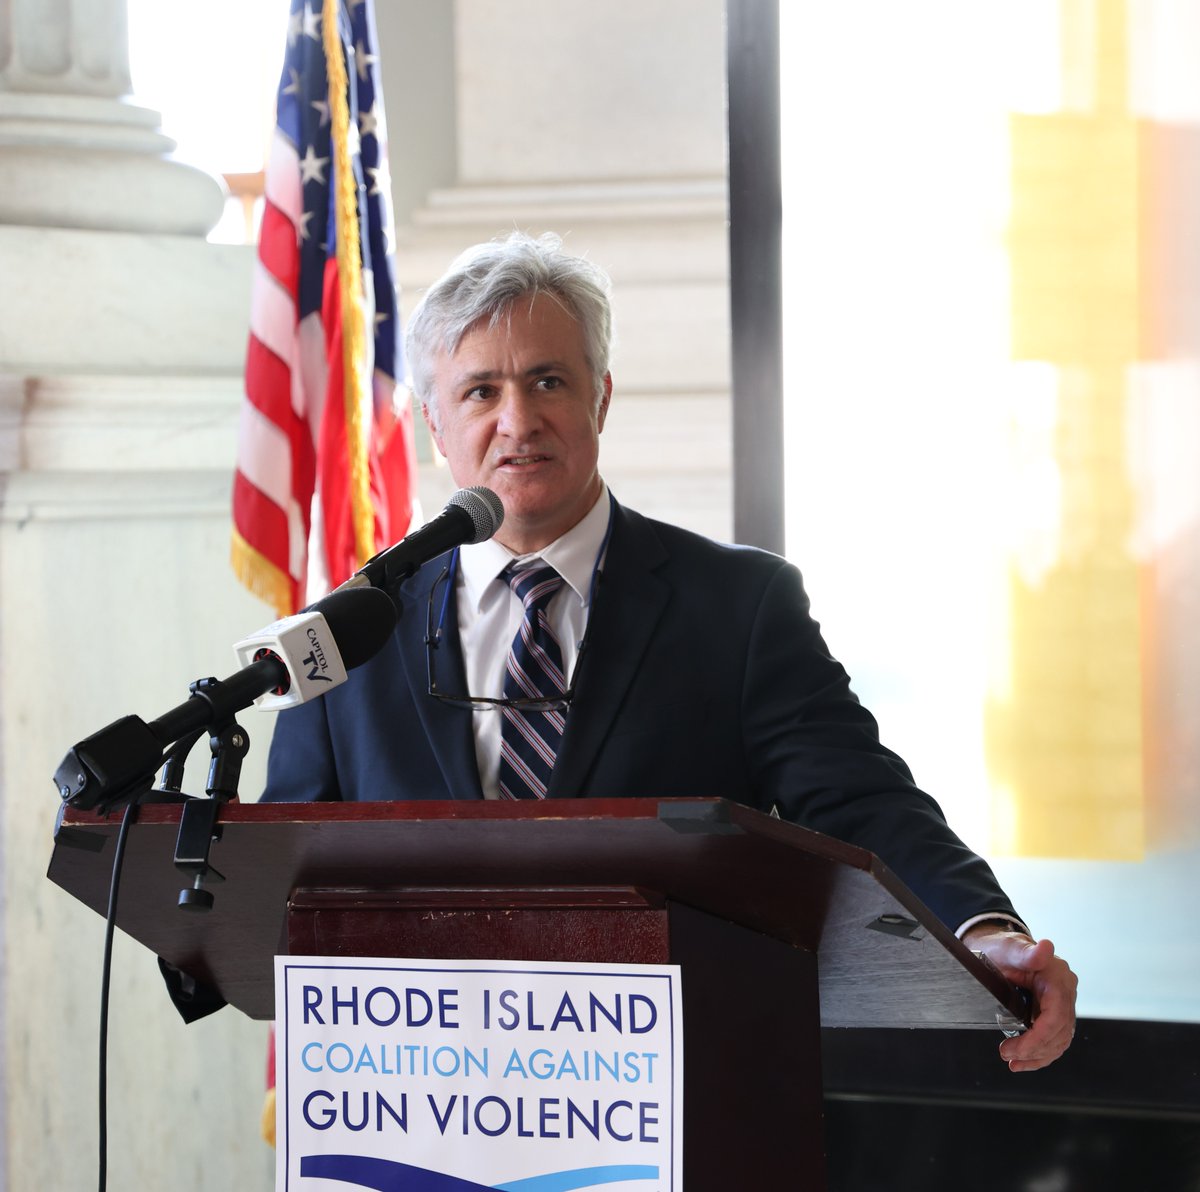 Members of the House, including @Justine4RI and @Rep_Jason, participated in a press event held at the State House today by @RICAGV1 and community partners, including @riaflcio, the National Education Association RI (NEARI), and @MomsDemand - RI in support of gun safety…